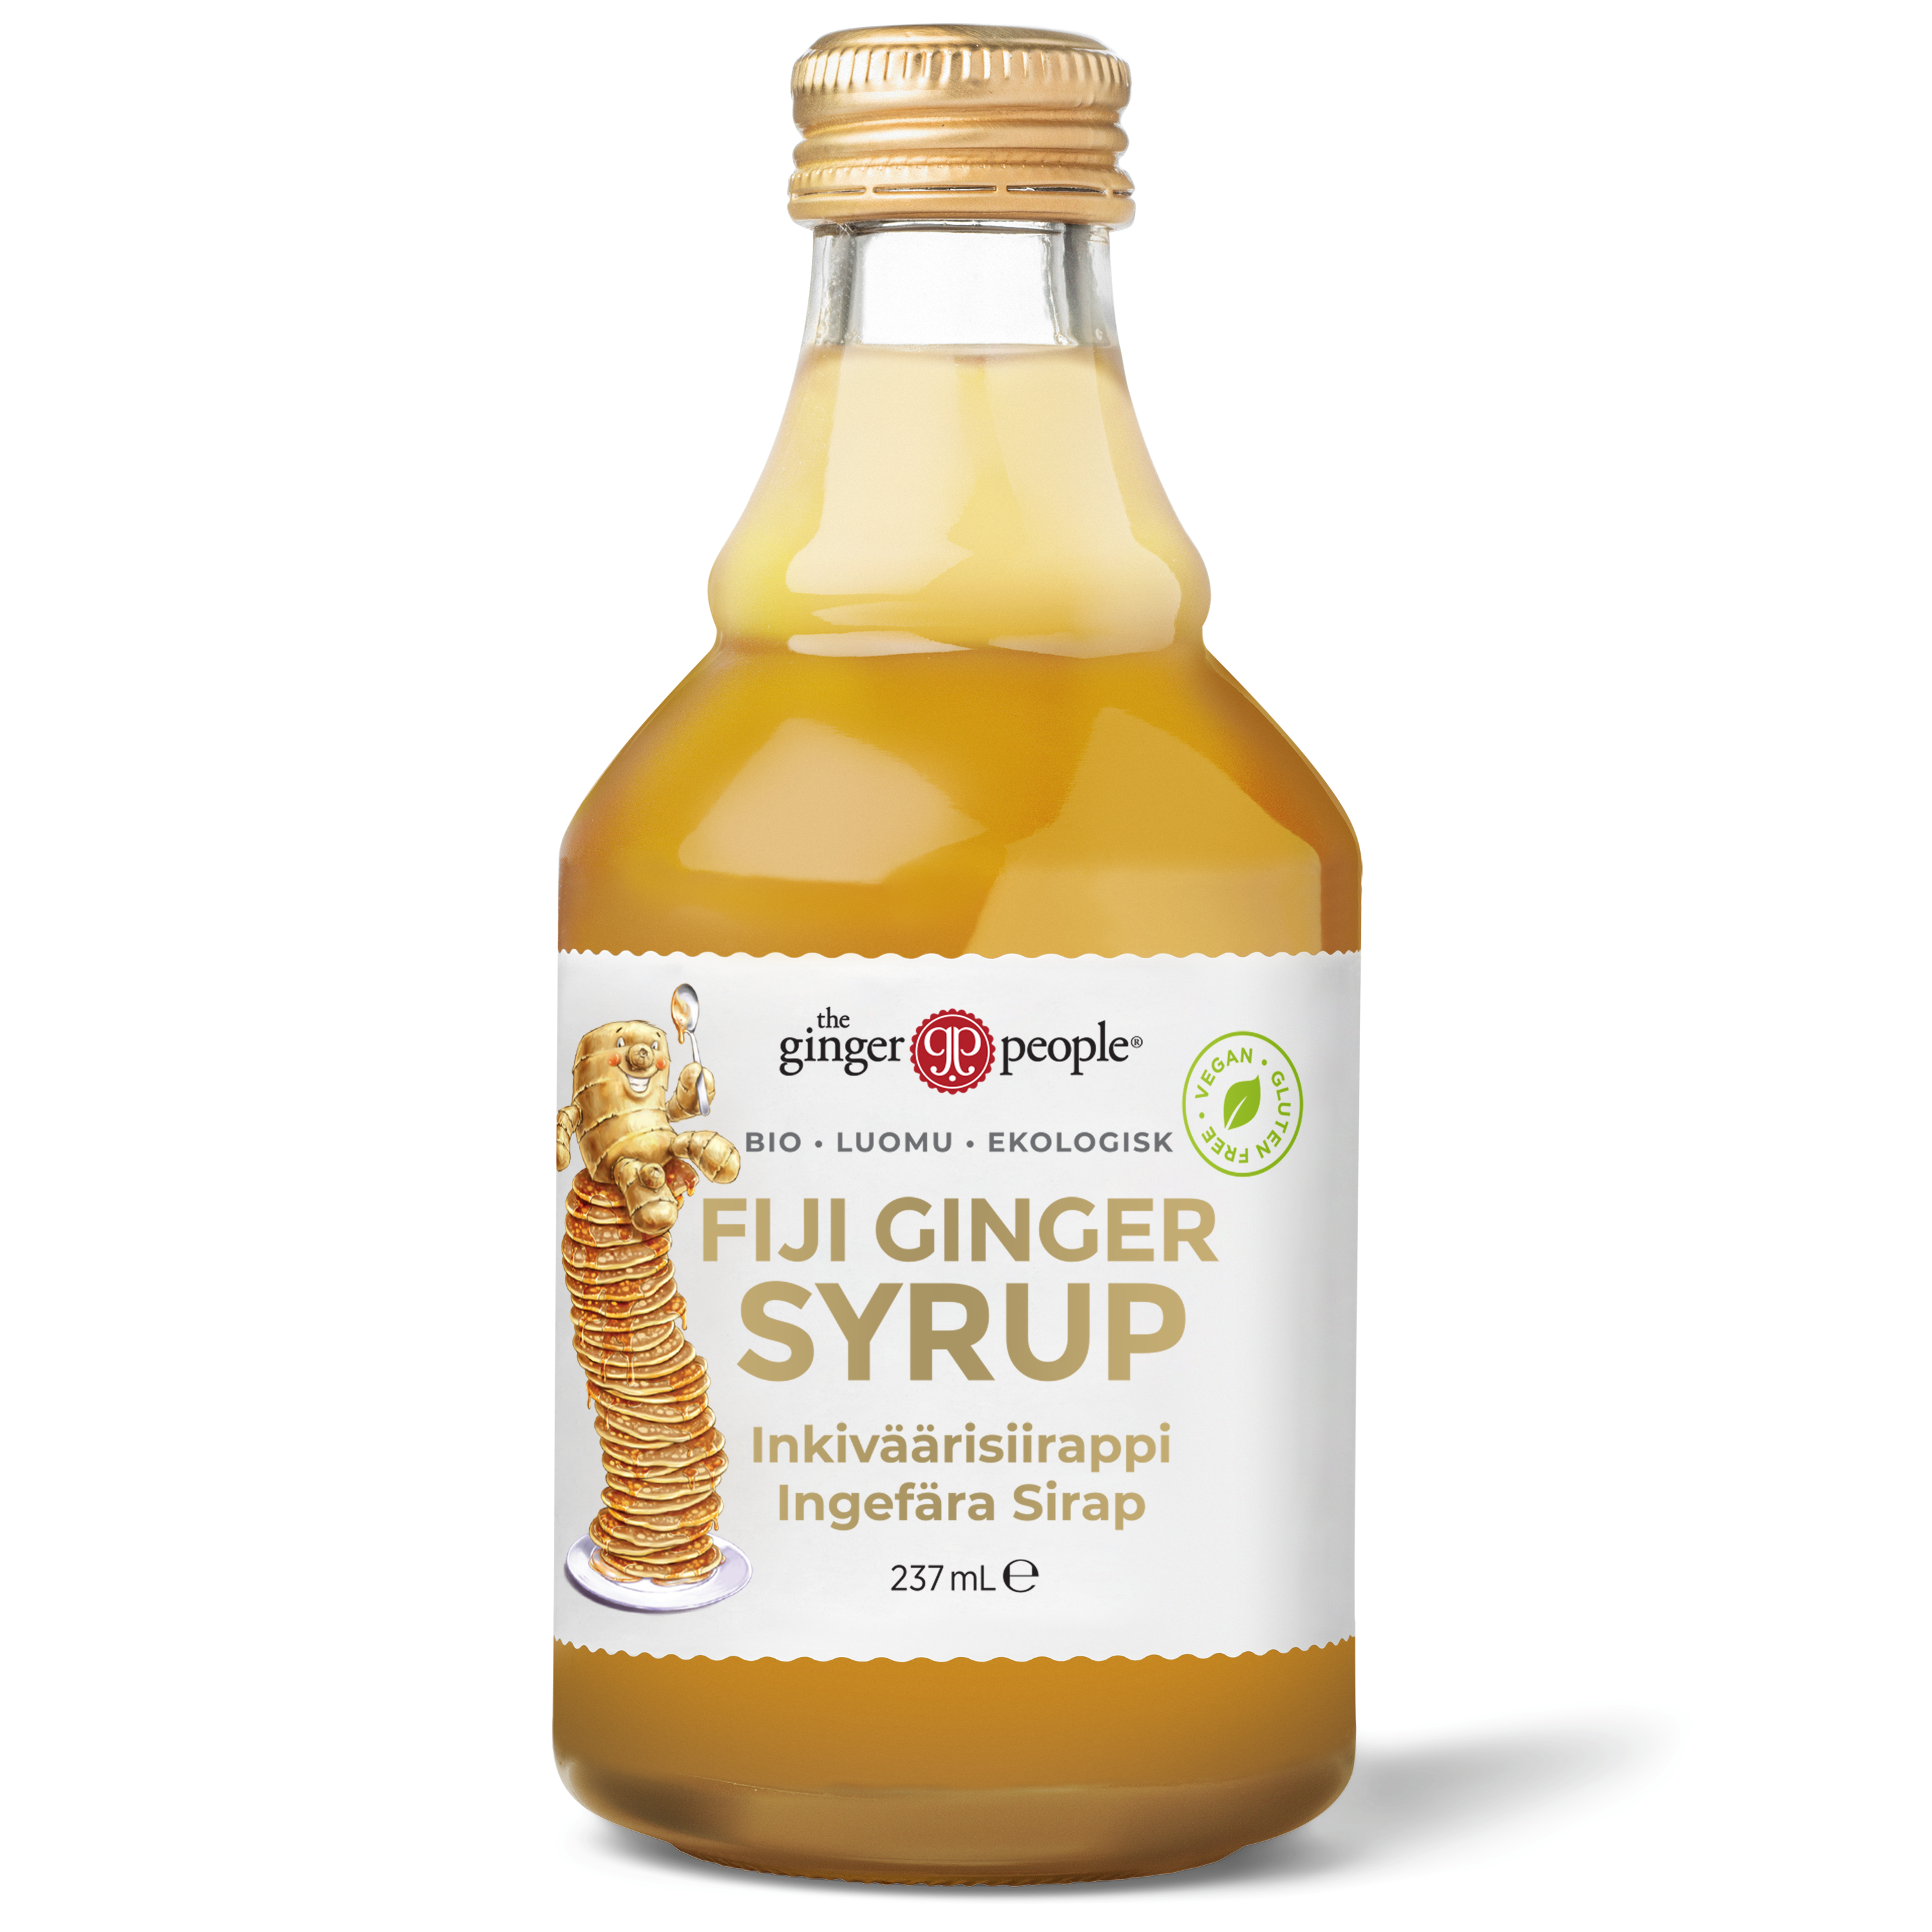 Fiji Ginger Syrup by The Ginger People